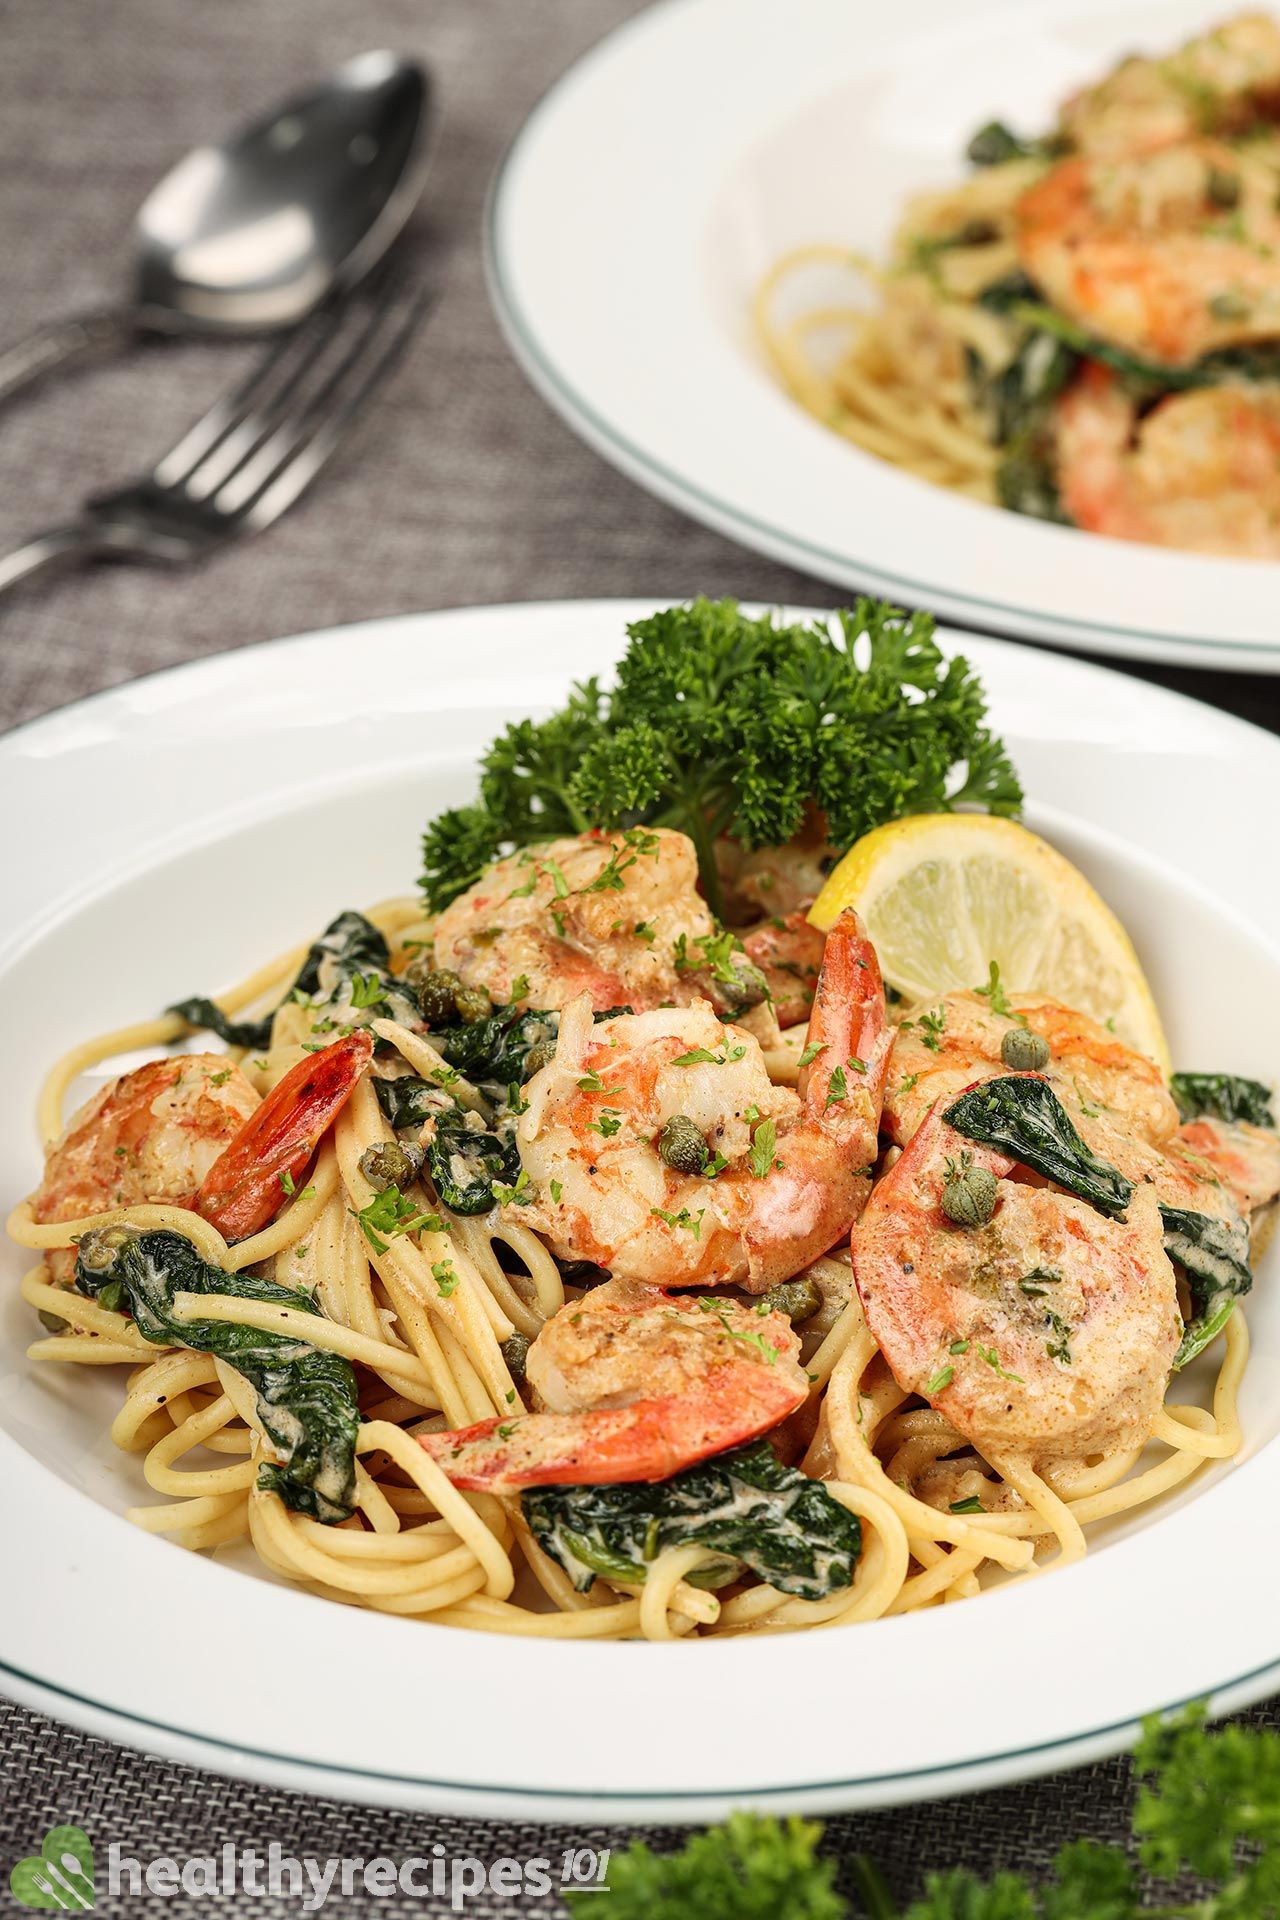 What Makes Our Shrimp Piccata Healthy